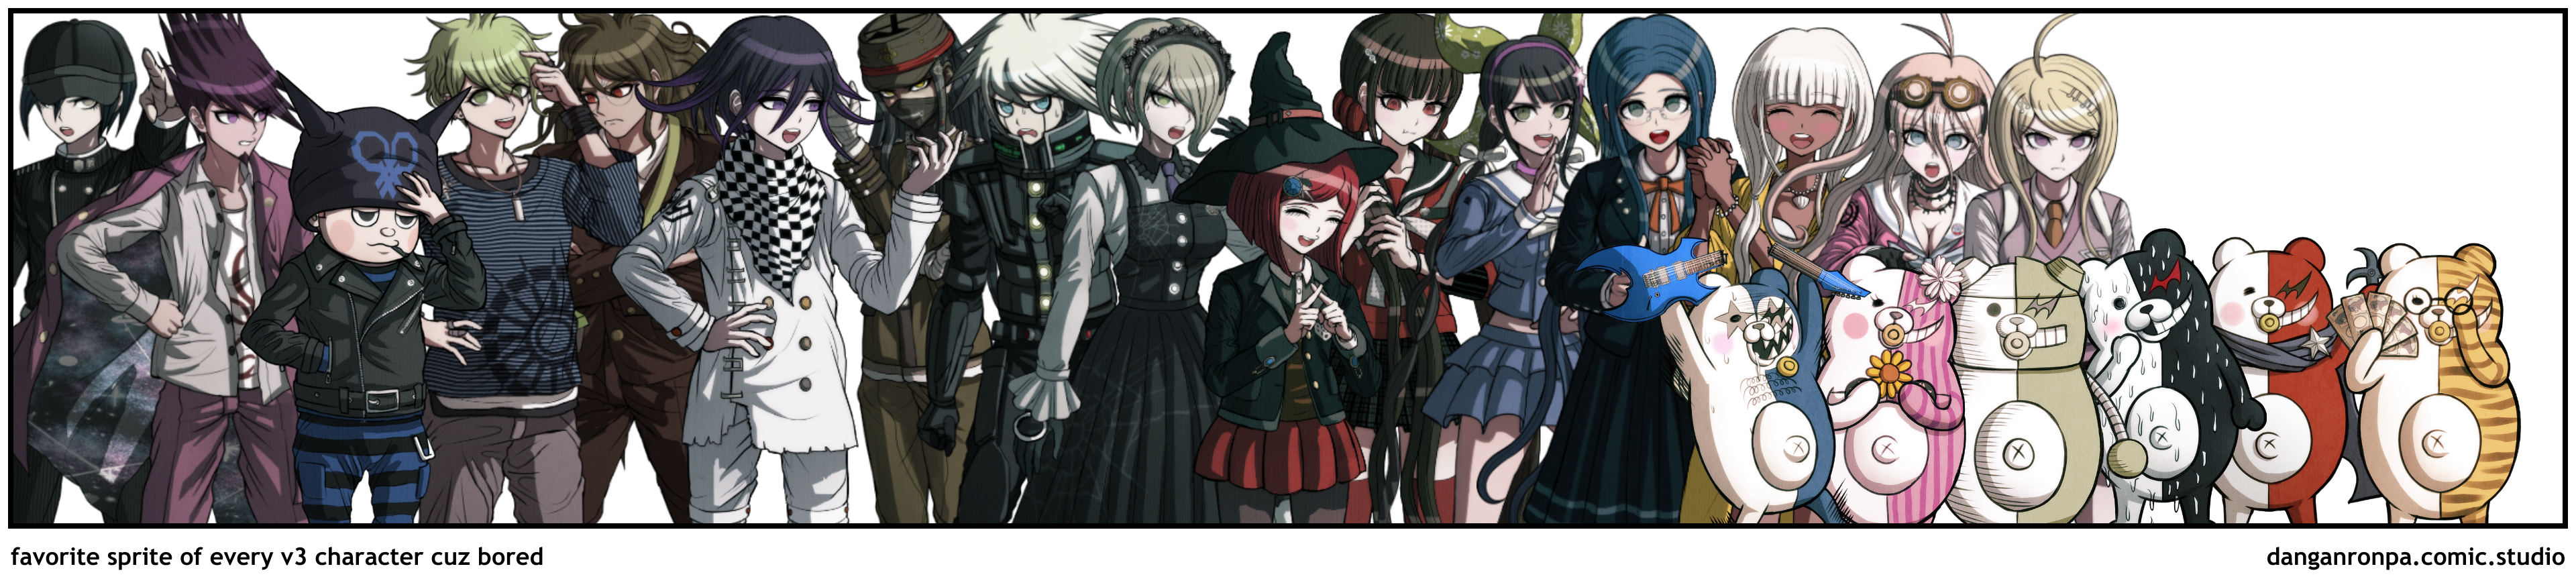 favorite sprite of every v3 character cuz bored